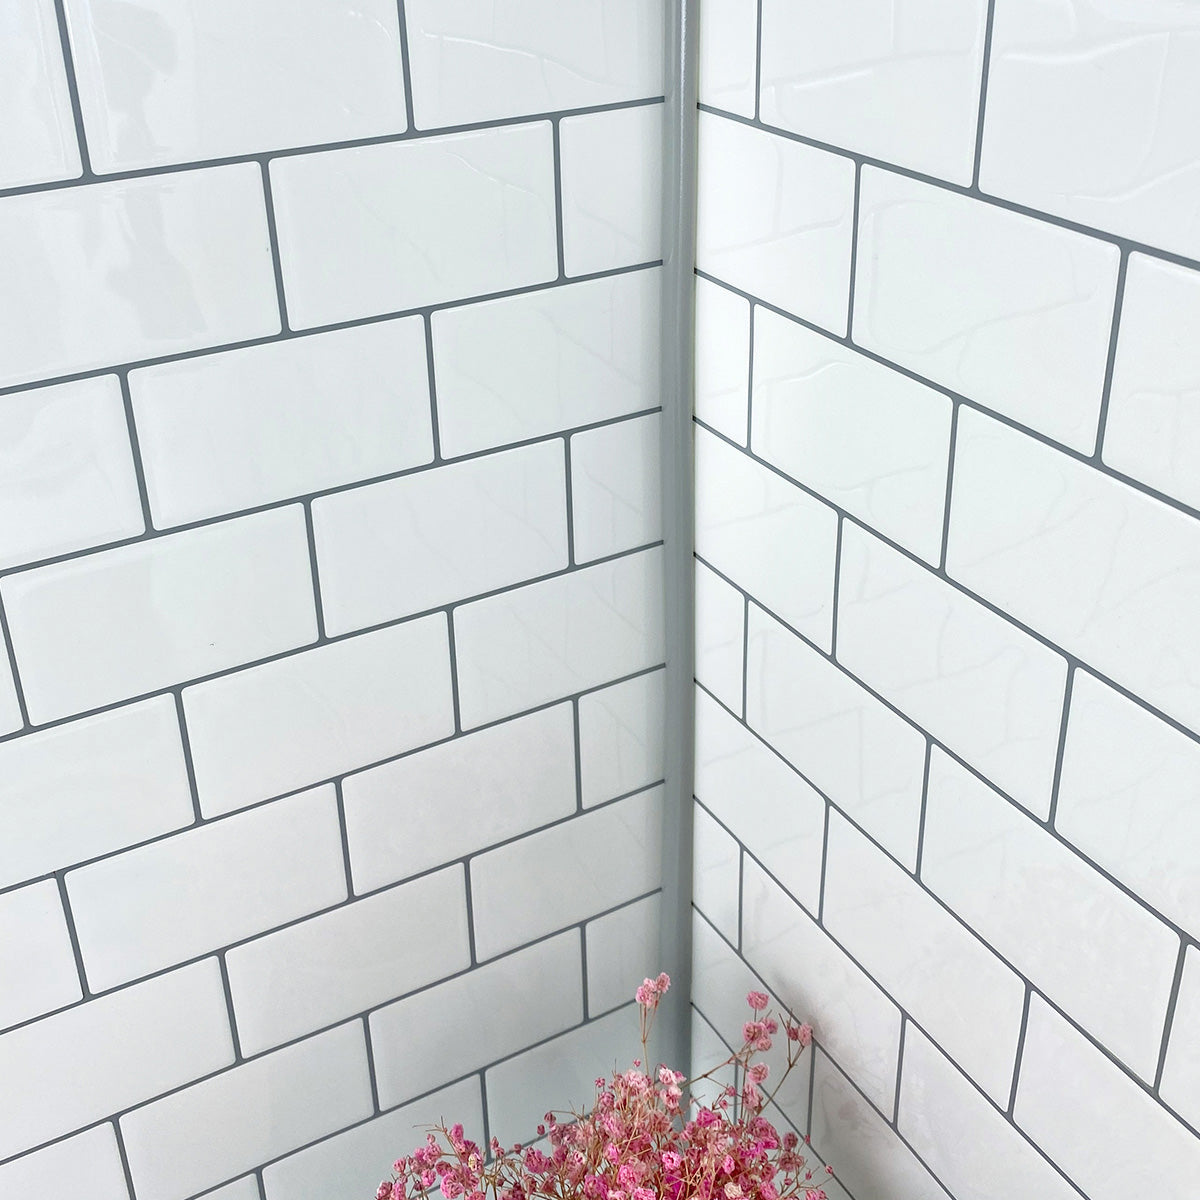 Grey edge trim in corner of white subway tiles with grey grout